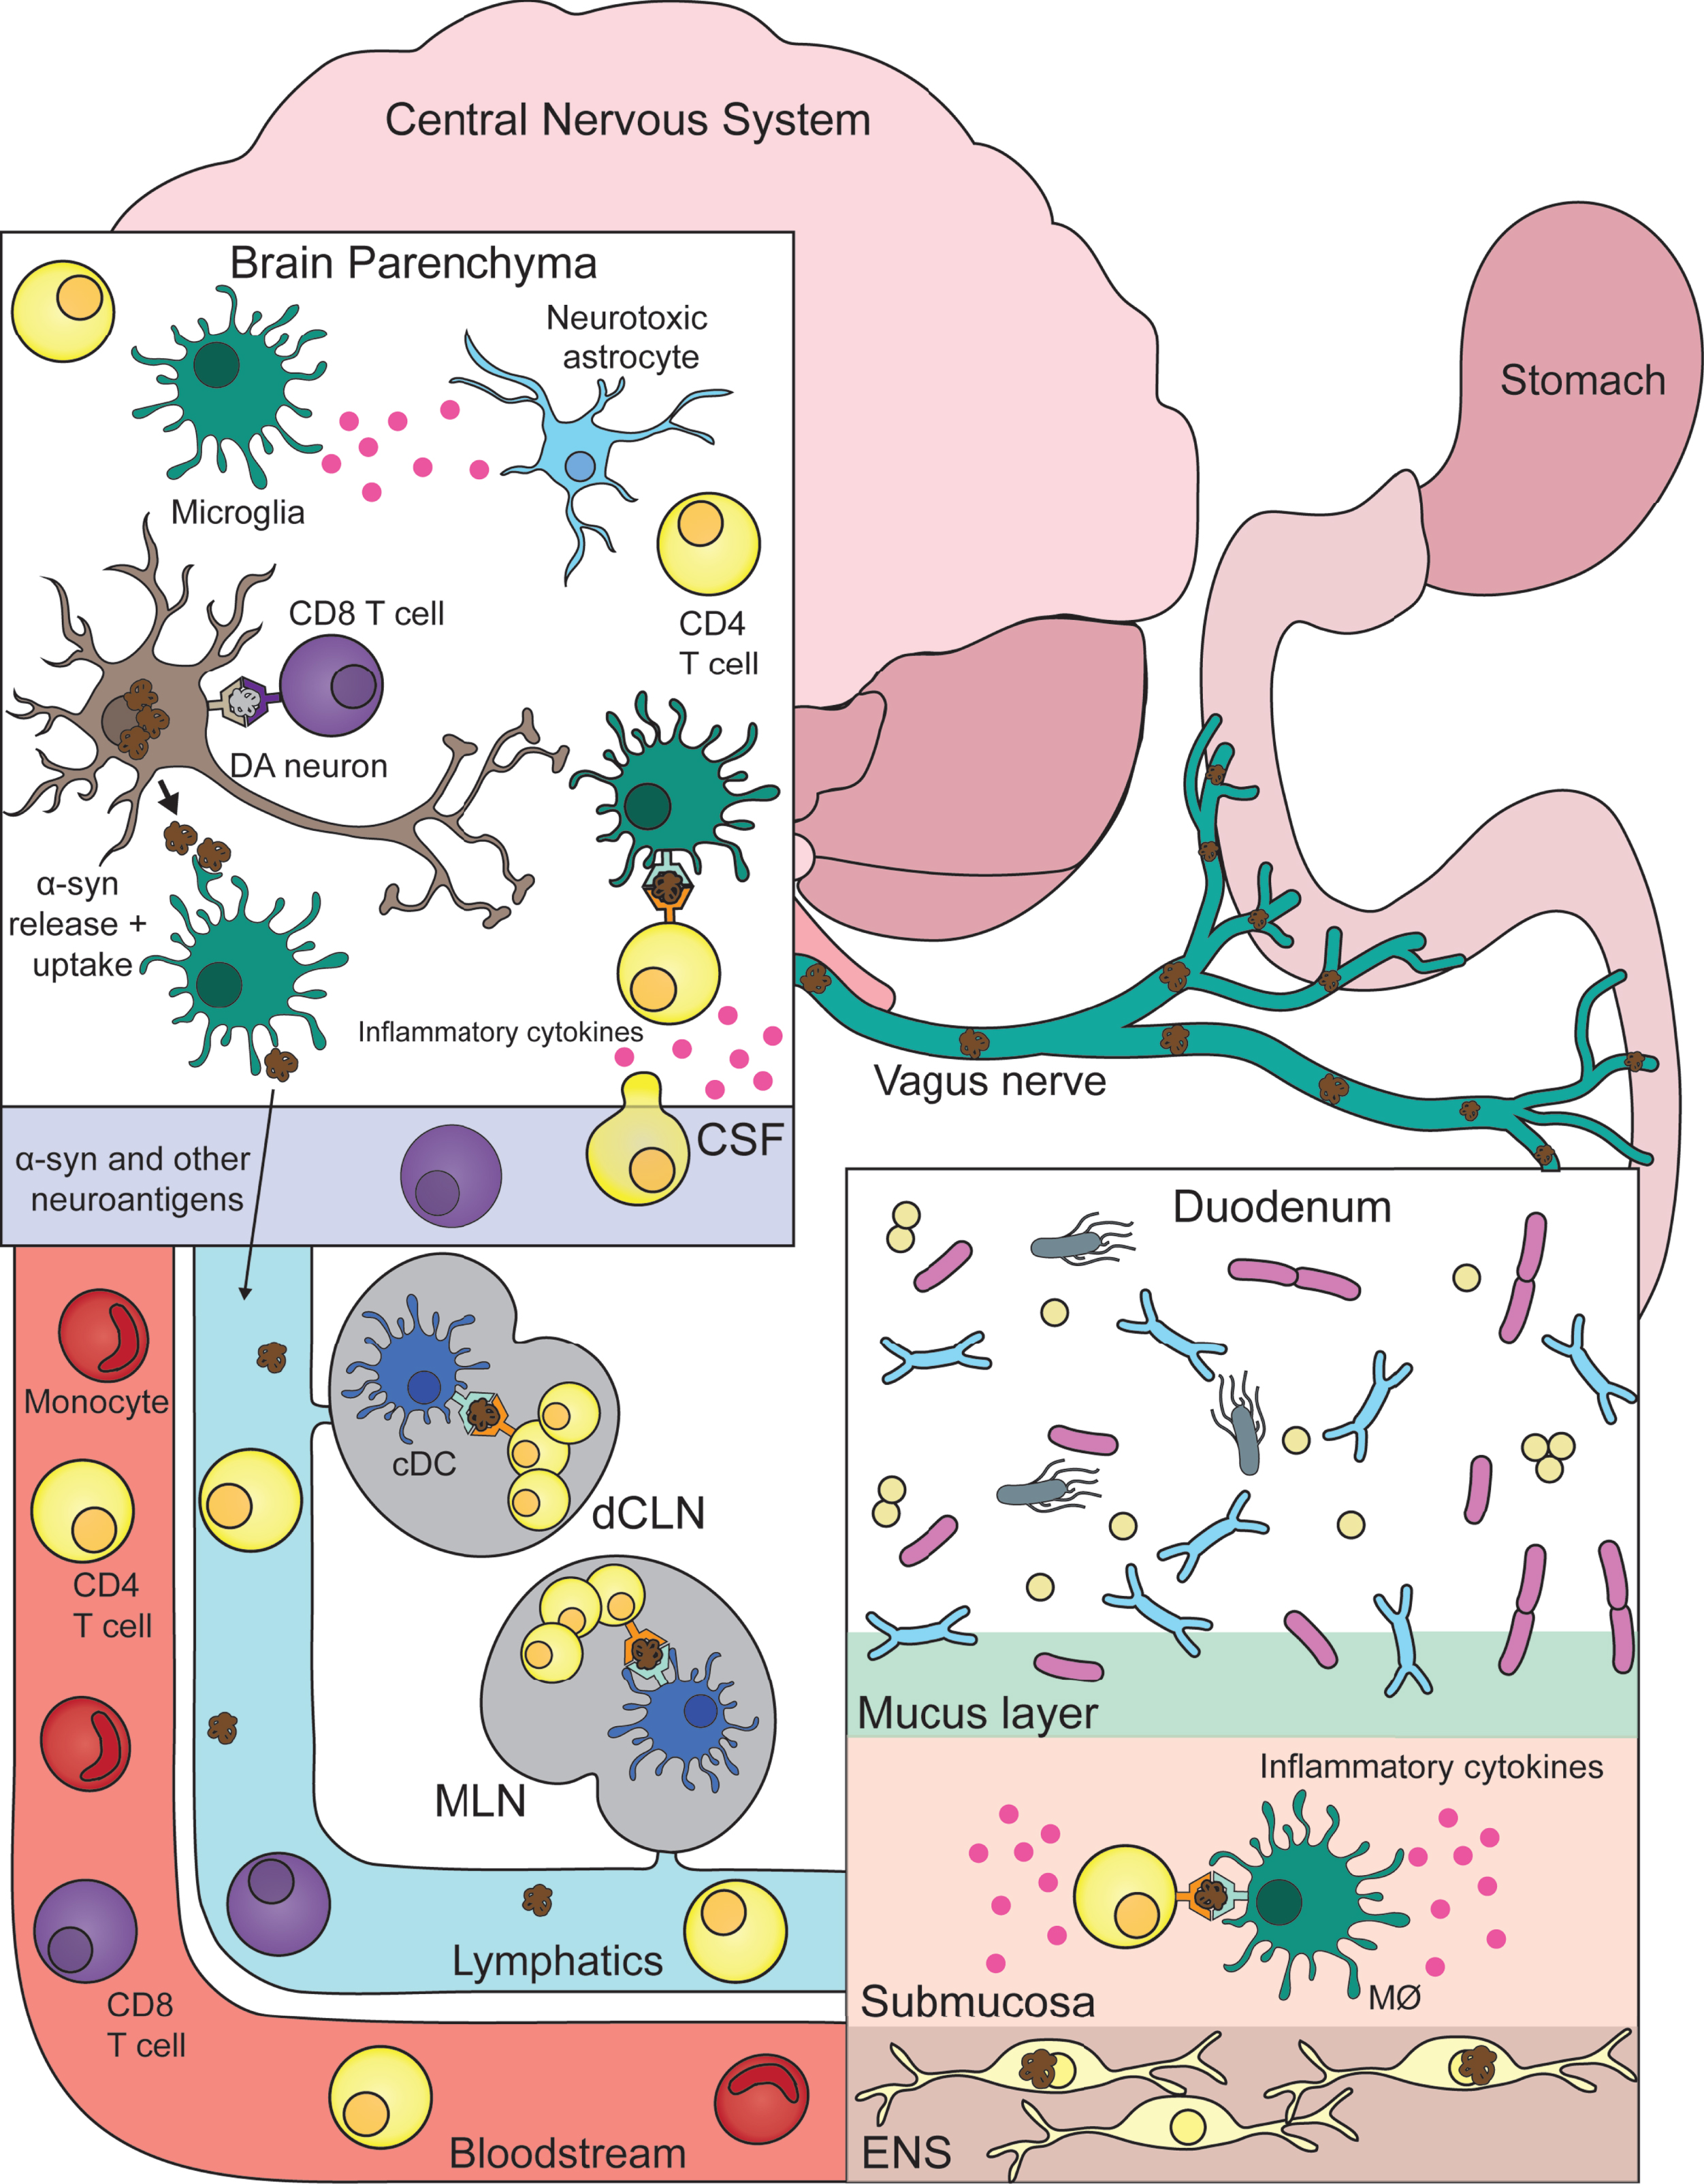 Connecting central and peripheral immune responses in Parkinson’s disease. Inflammatory and damaging events in the gastrointestinal tract (duodenum) caused by a combination of environmental, genetic, microbial, and immune factors leads to α-synuclein (α-syn) pathology in the innervating enteric nervous system (ENS). Misfolded α-syn species within the ENS may become targets for resident macrophages (MØ) with subsequent antigen presentation to T cells that misrecognize self-peptide and possibly expand in the gut-draining mesenteric lymph nodes (MLN). This α-syn provoked inflammatory response promotes further α-syn pathology and eventual propagation to the central nervous system via the vagus nerve. Now α-syn pathology with neurons leads to similar inflammation as described in the gut. With microglia taking up pathogenic α-syn—leading to their activation (and subsequent activation of neurotoxic astrocytes) and presentation of α-syn antigen to cerebrospinal fluid (CSF) patrolling T cells. Another link between the two distant systems is also the bloodstream that connects them. T cells and other immune cells may be able to extravagate through the blood-brain barrier in response to heightened inflammation coming from the brain parenchyma/CSF. Lastly, similar to the MLN, T cells may be encountering and expanding to α-syn and other autoinflammatory neuroantigens within the central nervous system draining deep cervical lymph node (dCLN). DA, dopamine; cDC, classical dendritic cell.